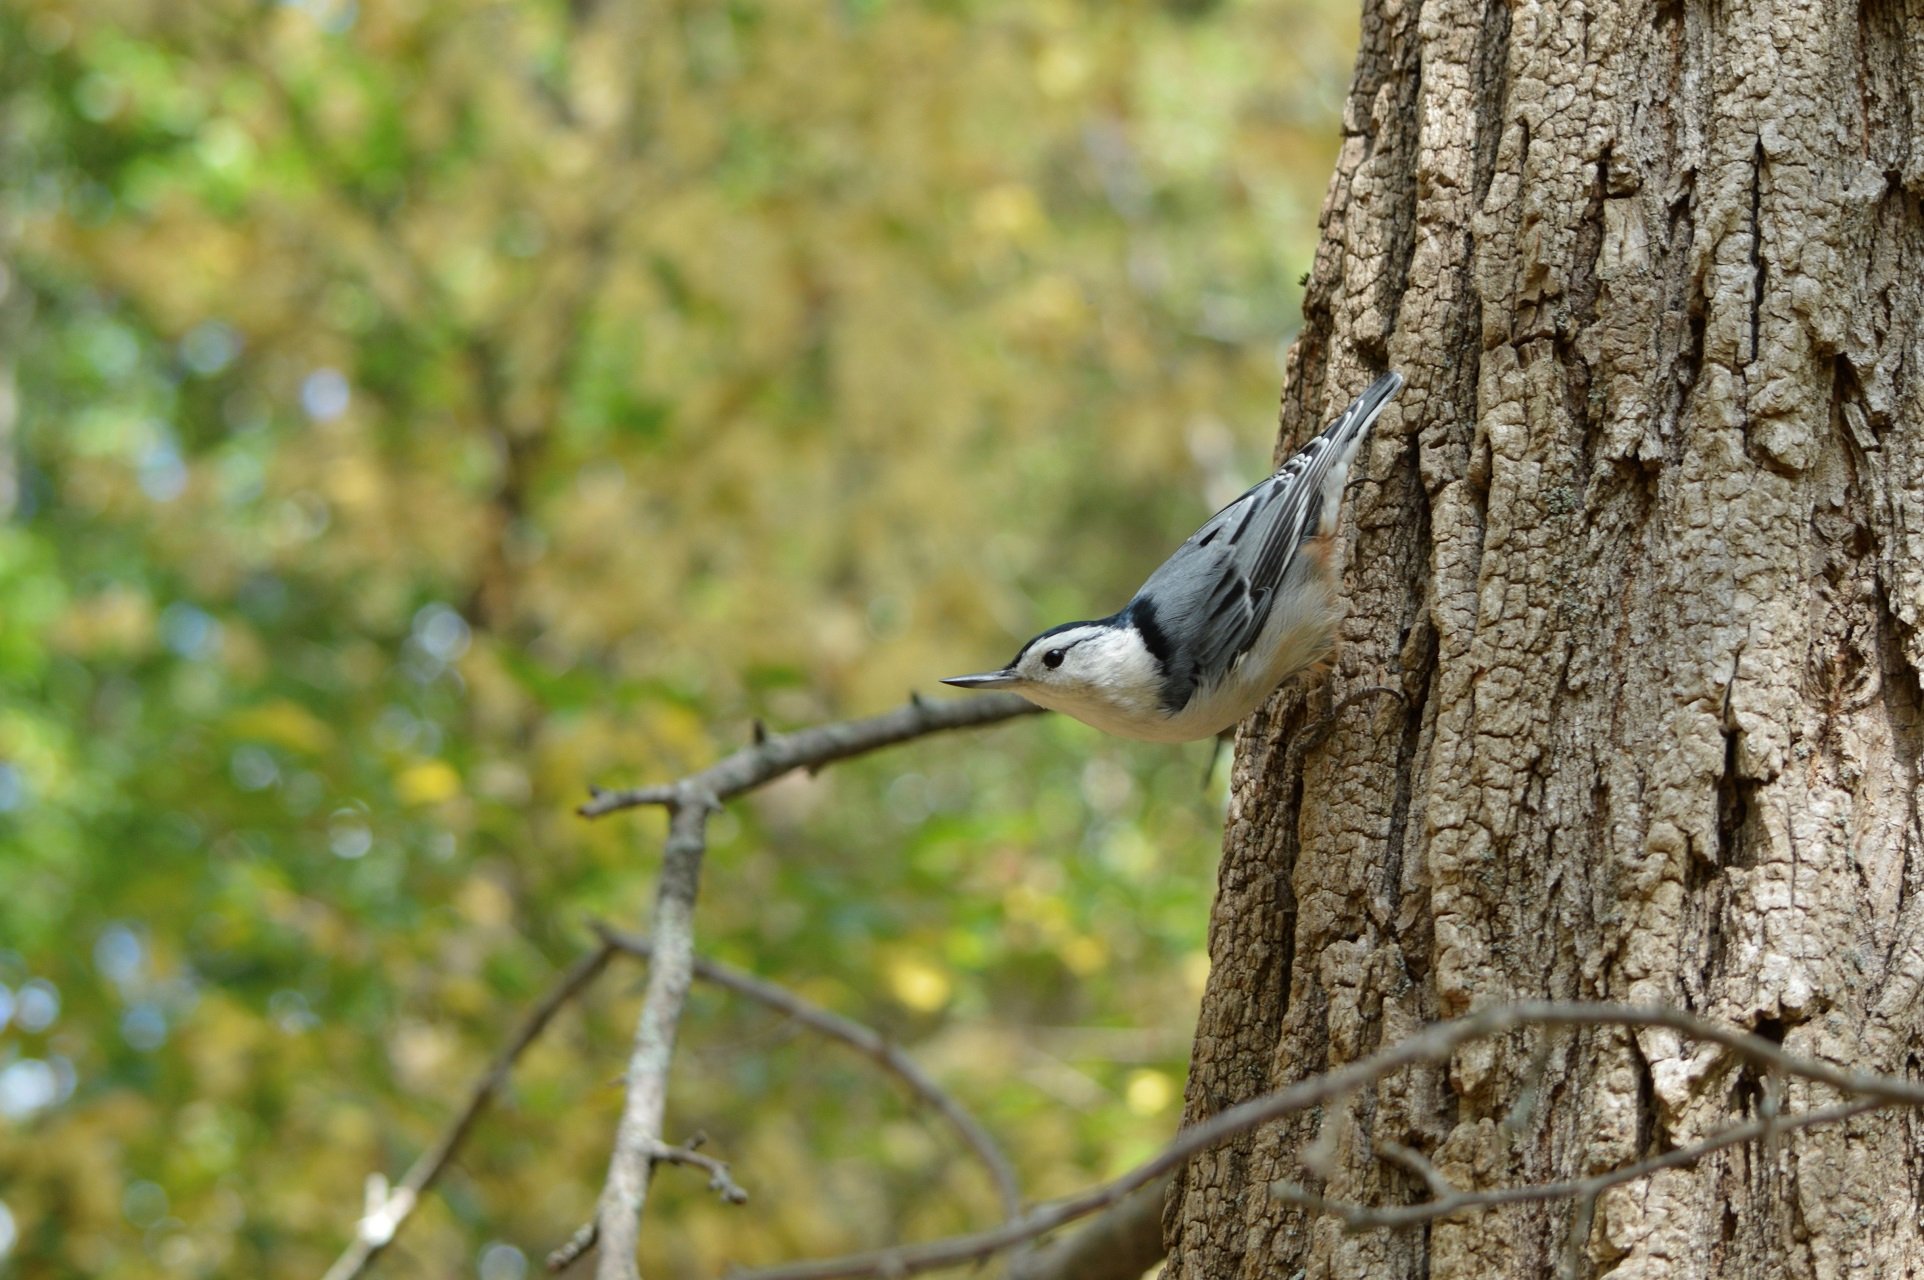 A White-breasted Nuthatch climbs down a tree trunk head-first.